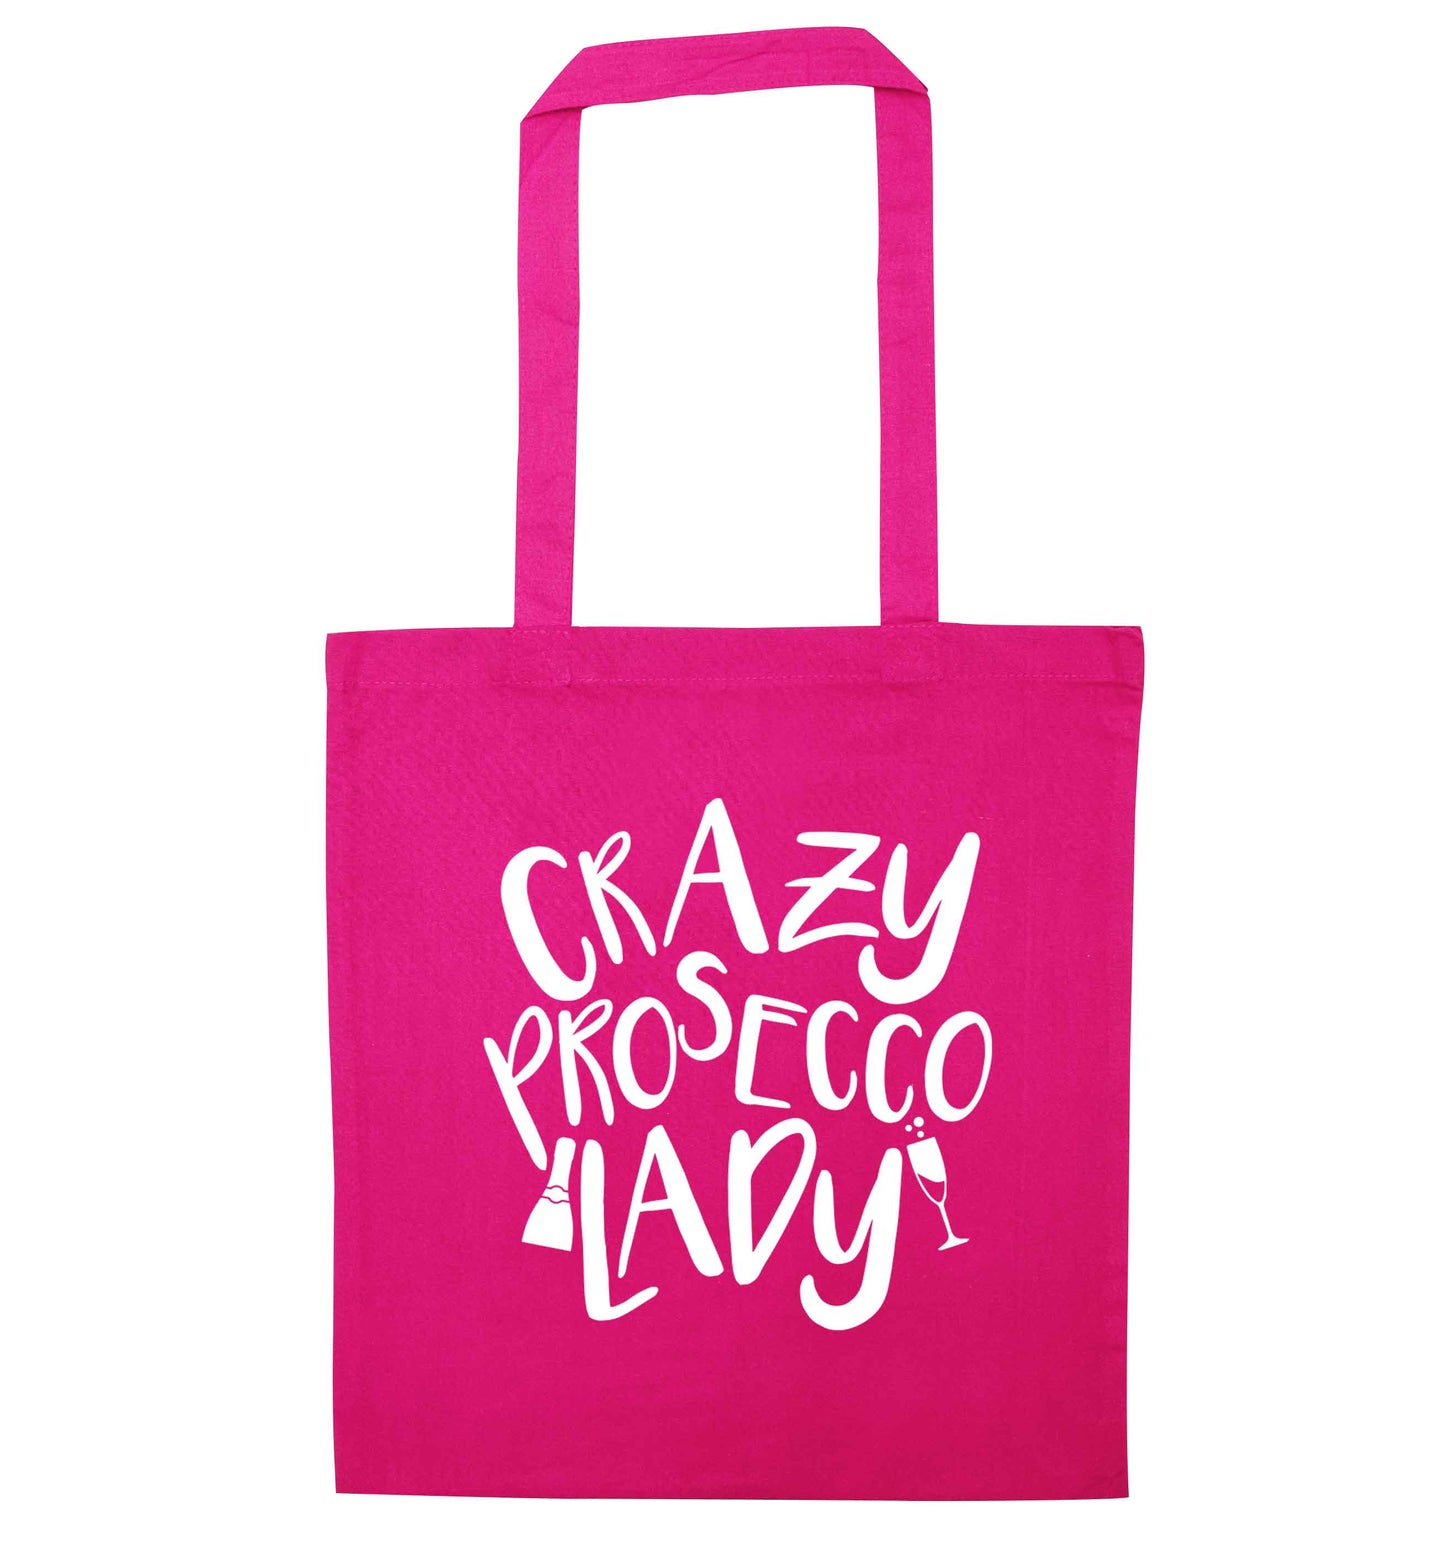 Crazy prosecco lady pink tote bag